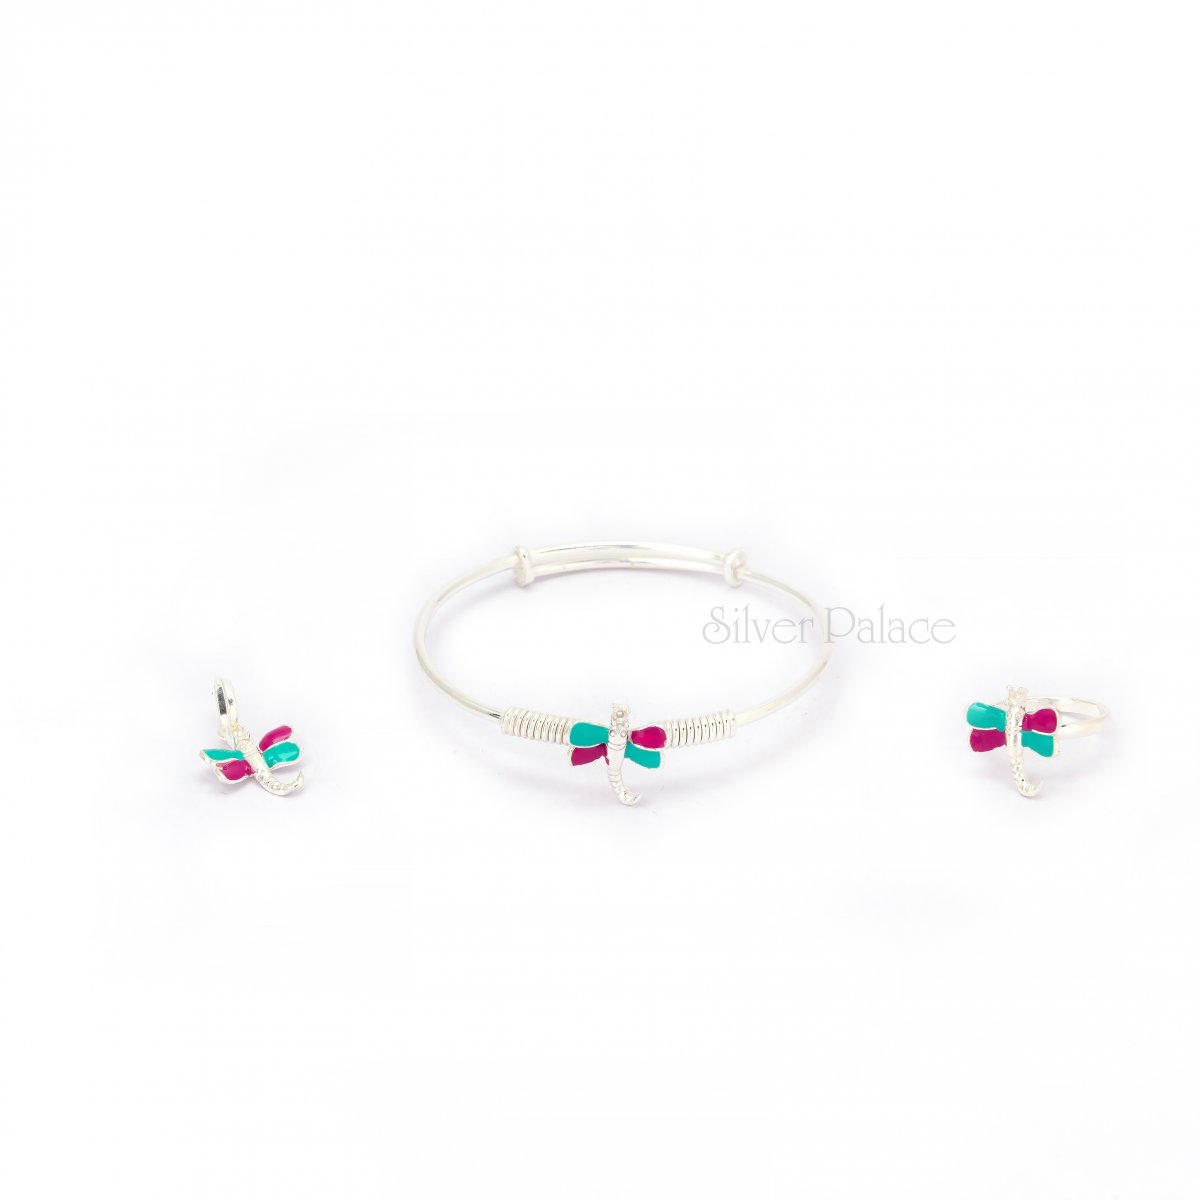 KIDS JEWELLERY GIFT SET IN PURE SILVER